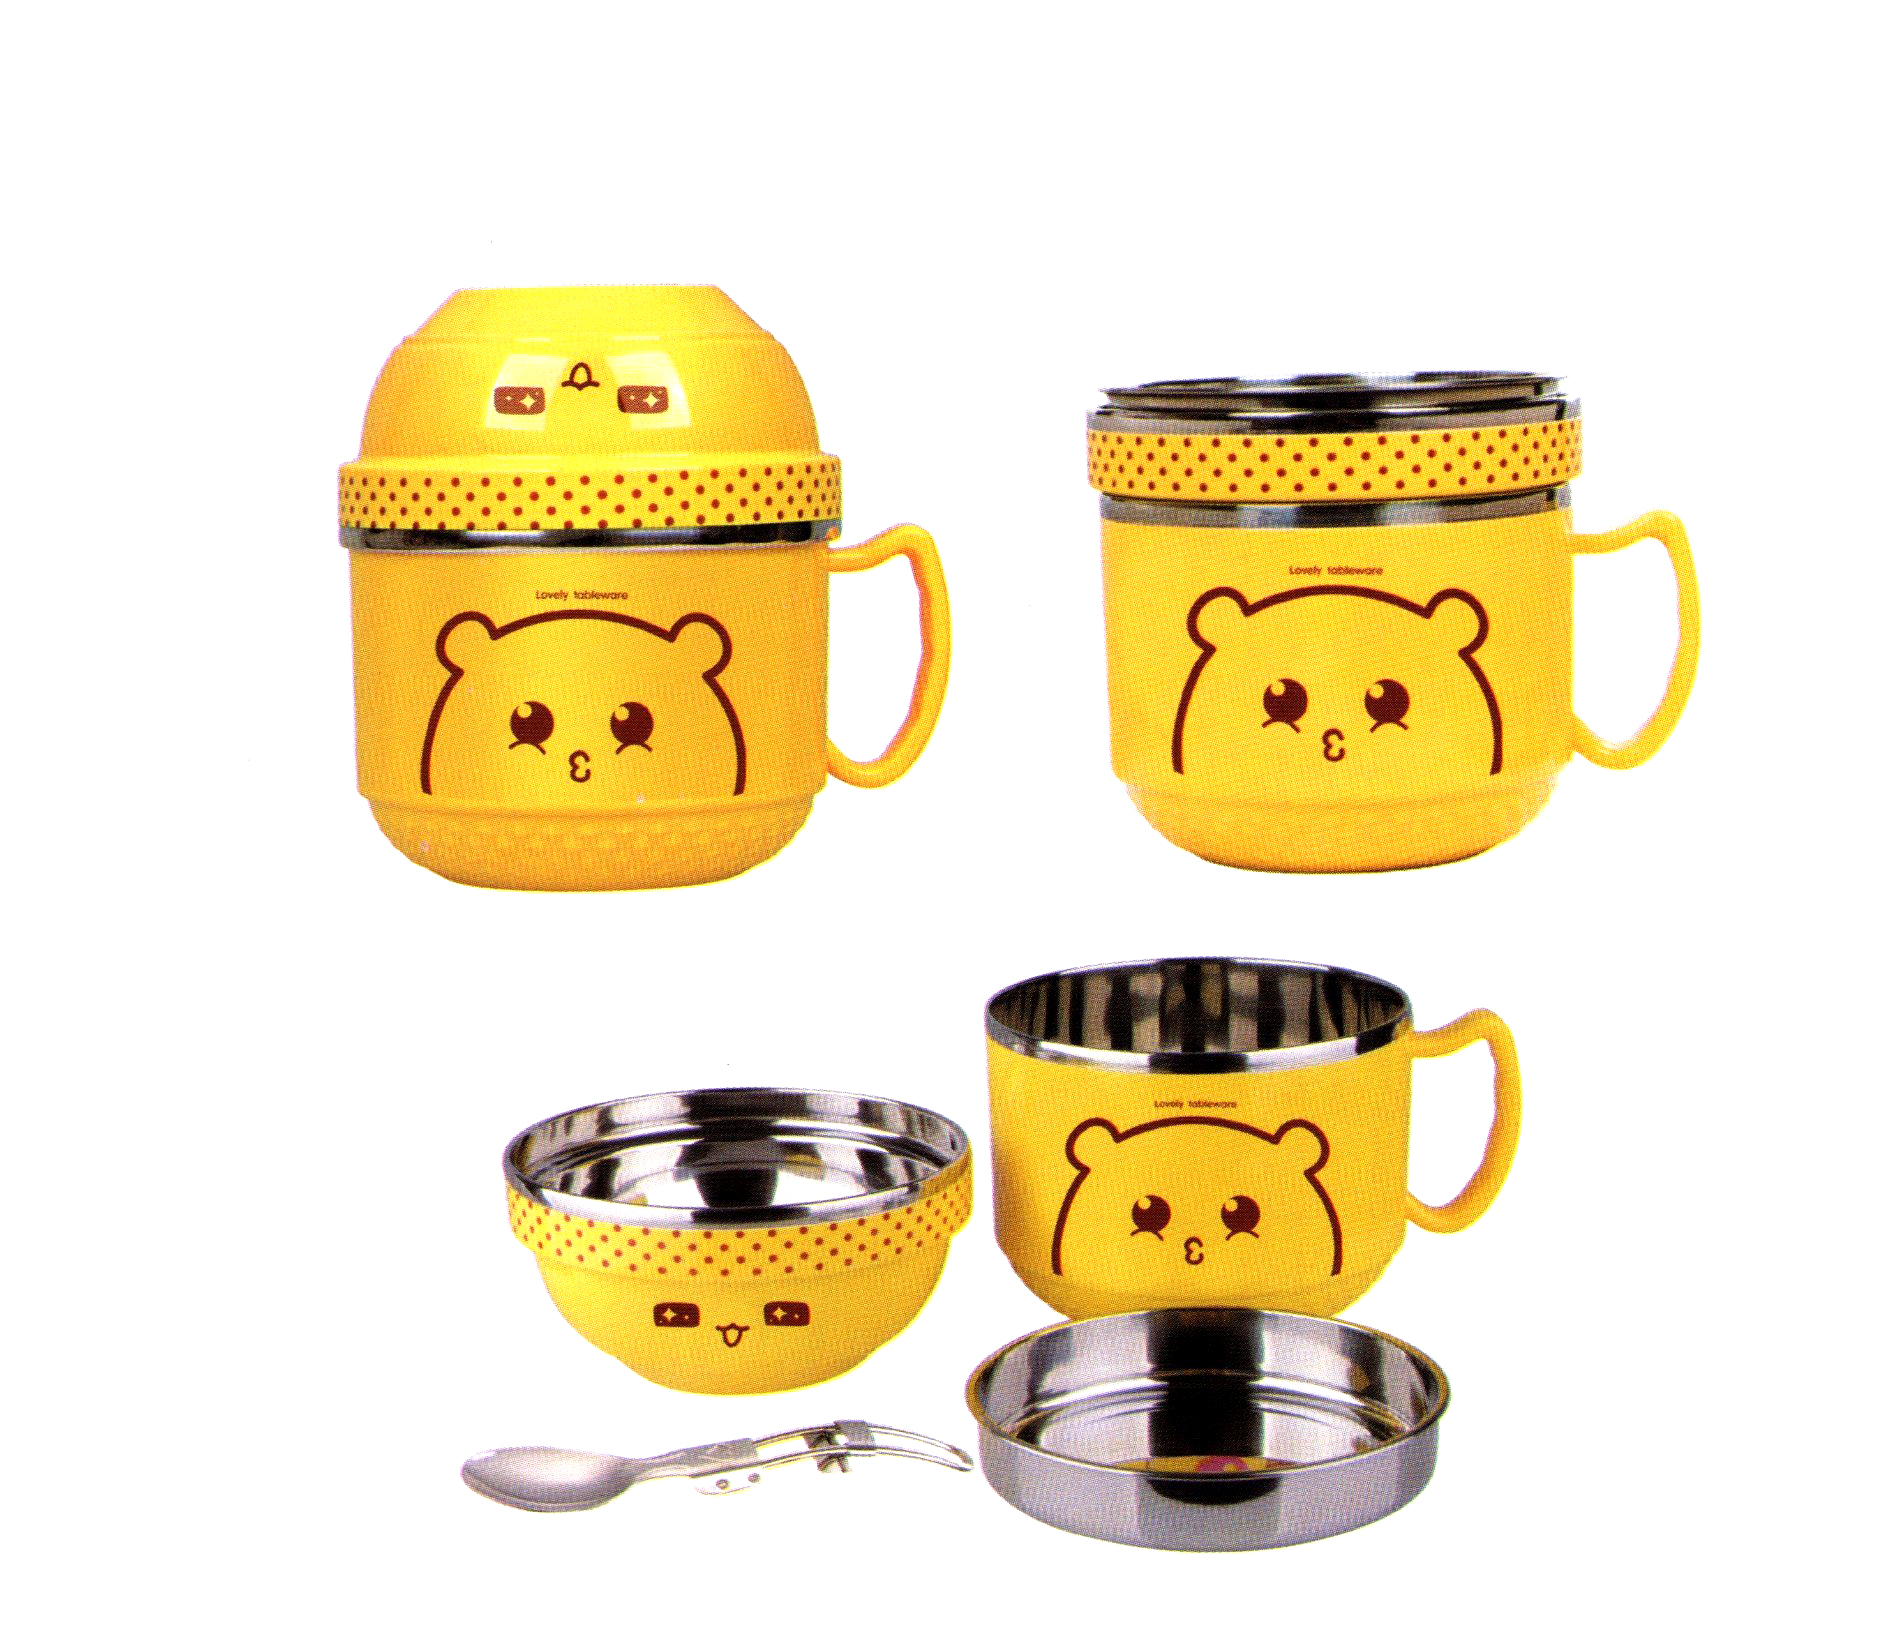 Hot sale Rose Gold Plated Cutlery Set -
 4 Set Series Stainless Steel Children Cups and Lunch Box Scc007 – Long Prosper